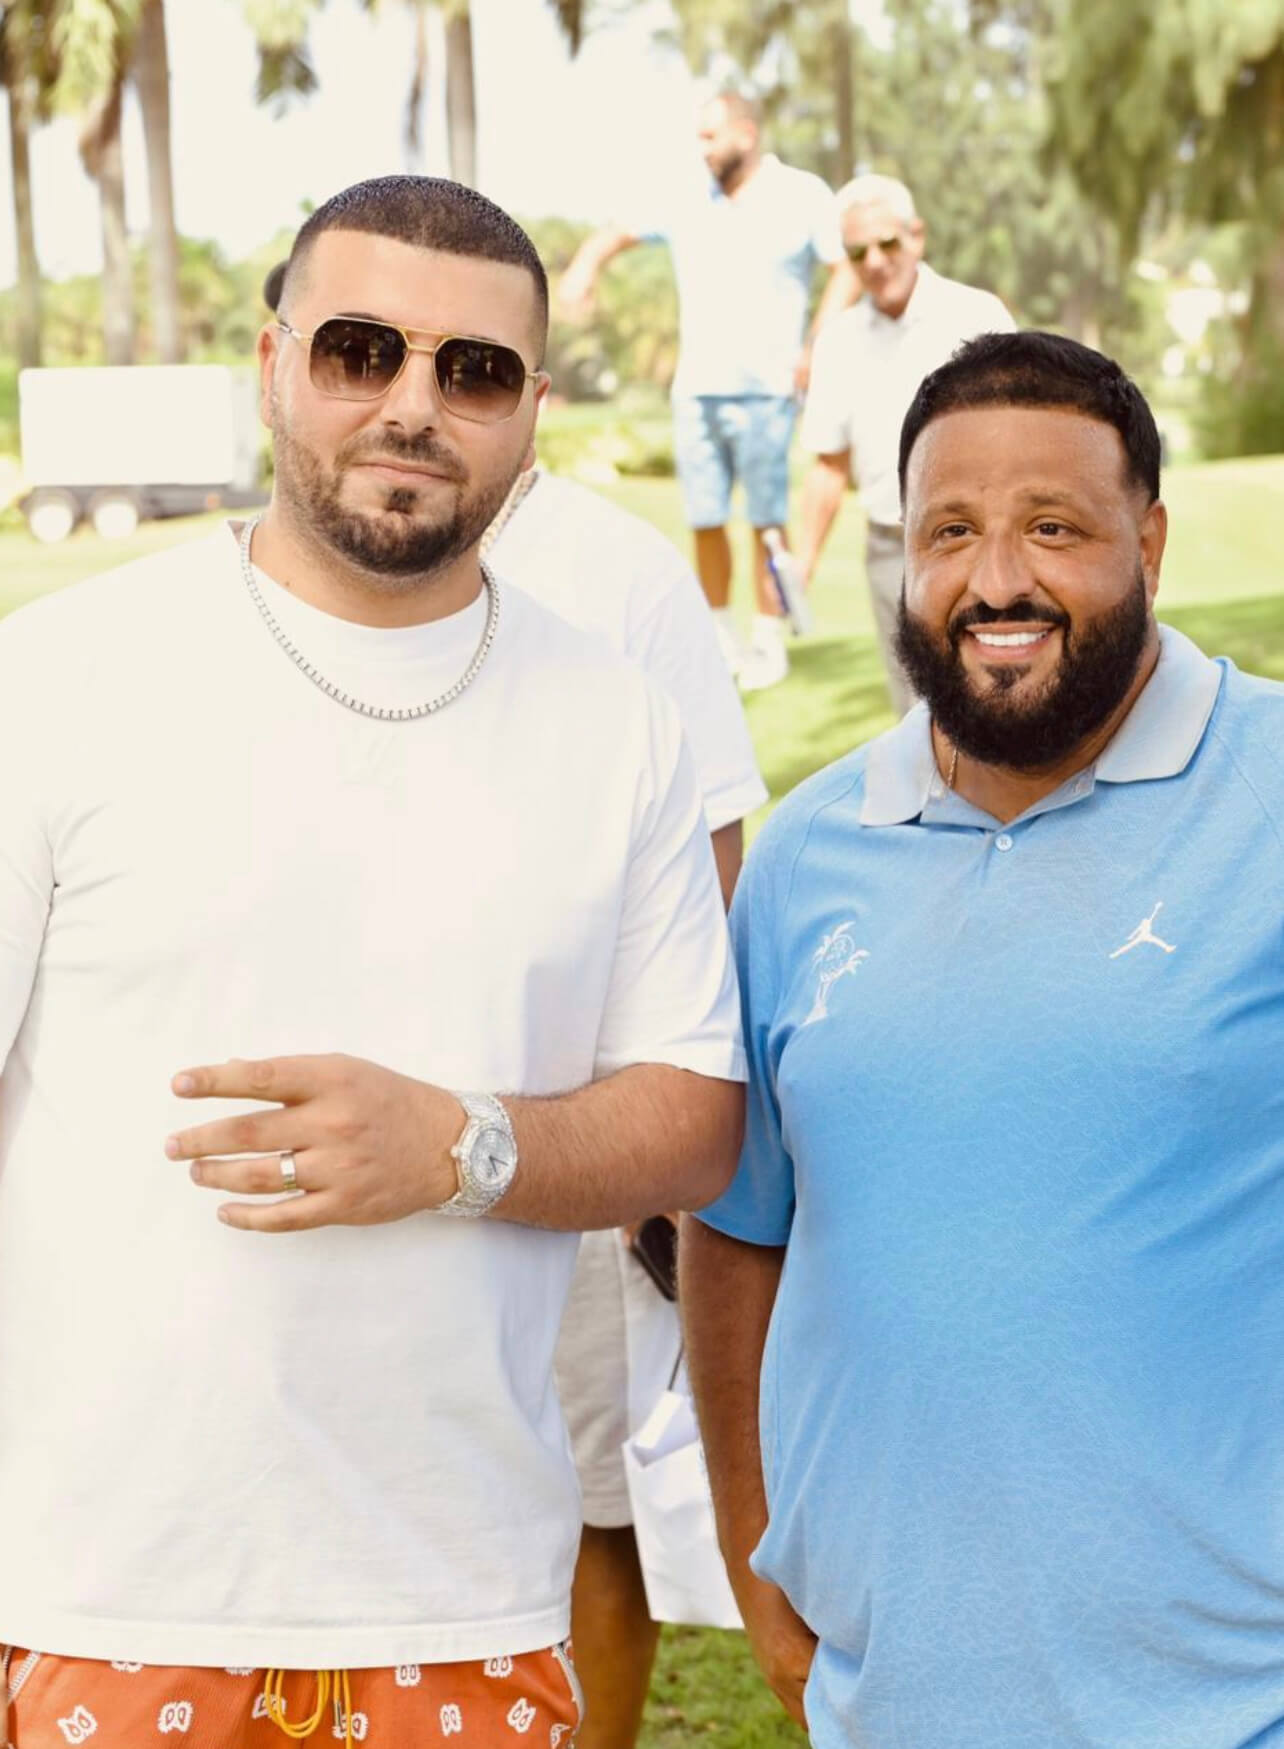 Avi of Avi & Co. Wears a White T-Shirt, Diamond Chain, Sunglasses, and Diamond Timepiece, Standing Beside DJ Khaled in a Blue Collared T-Shirt on a Golf Course.